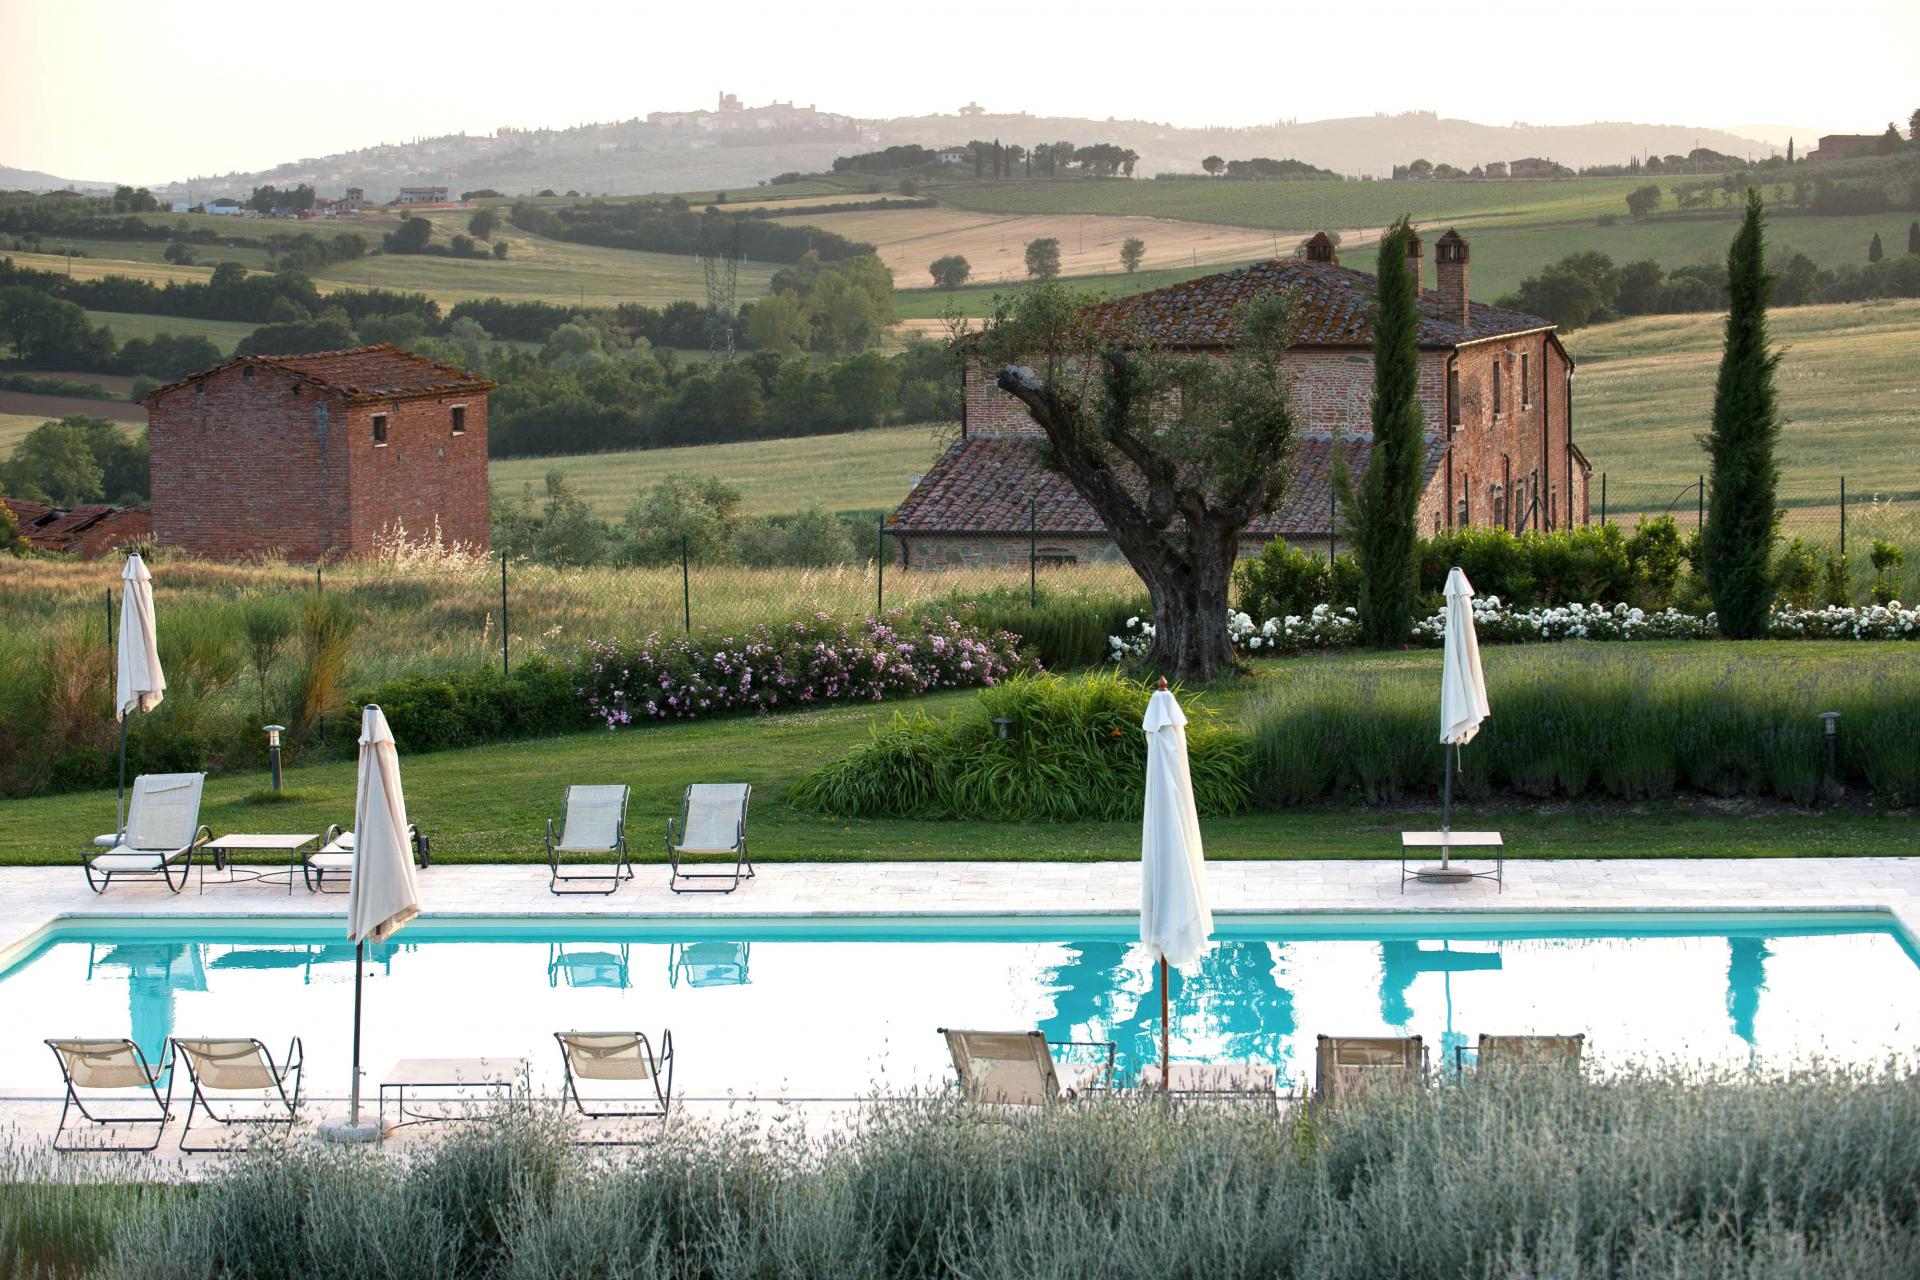 Agriturismo Tuscany, very attractive and hospitable